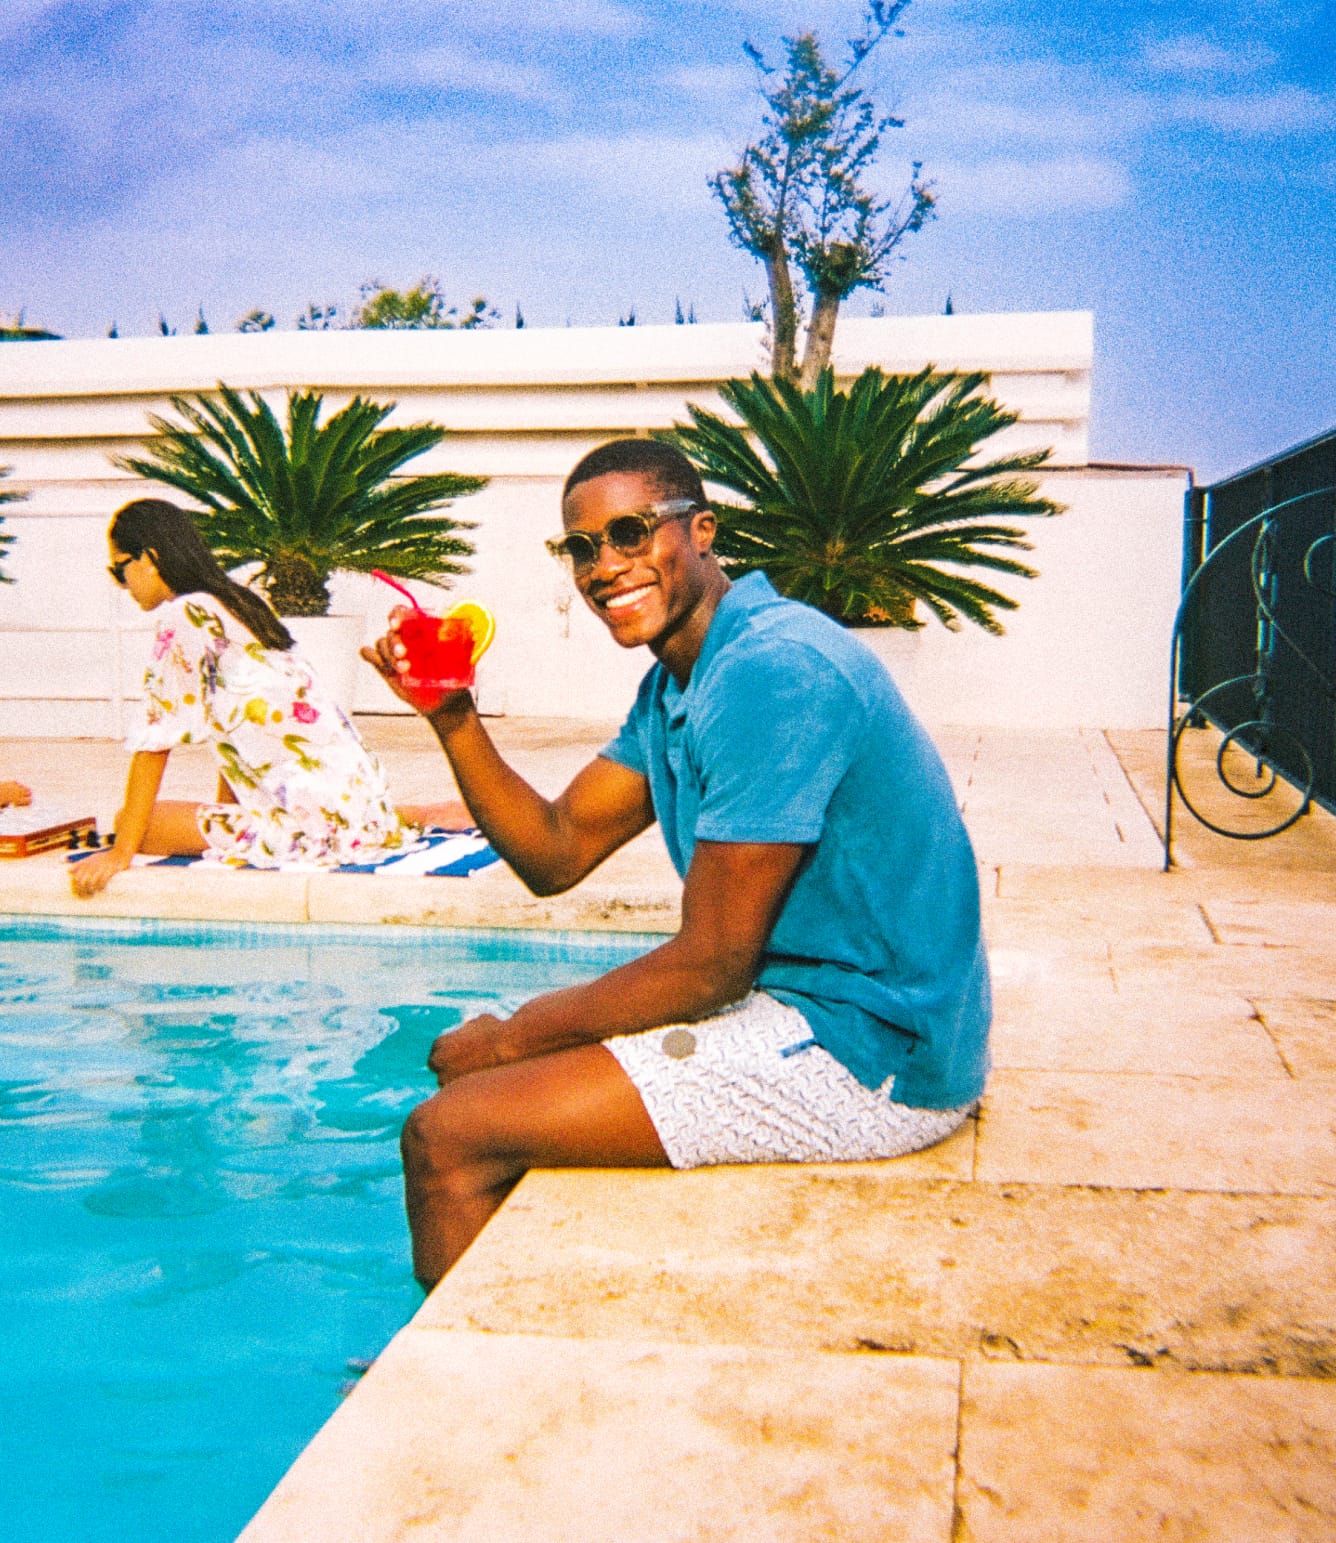 Man in blue top sat by pool and wearing sunglasses